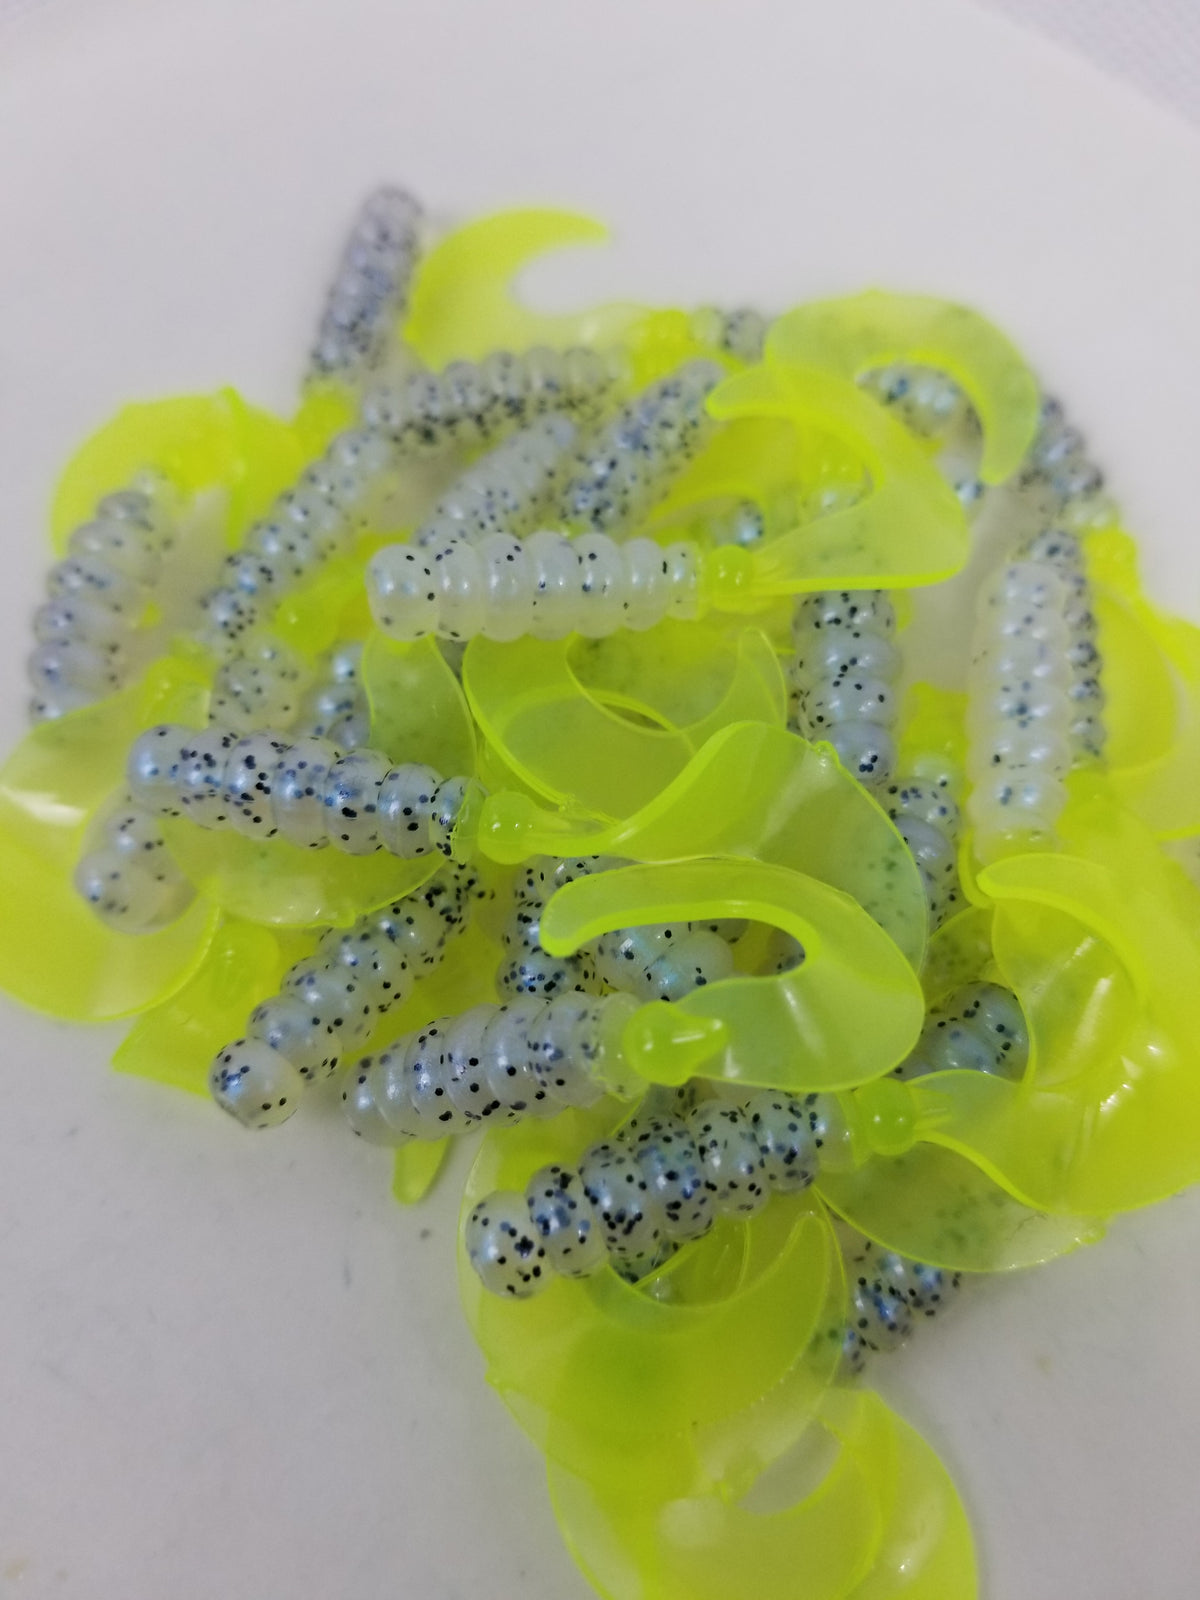 2023 Cam's 2(HOLOGRAM FLAKE) Curly Tail Grub 40pc Monkey Milk & Chartreuse  Curly Tail Crappie Soft Jigs [A Cam's Exclusive]